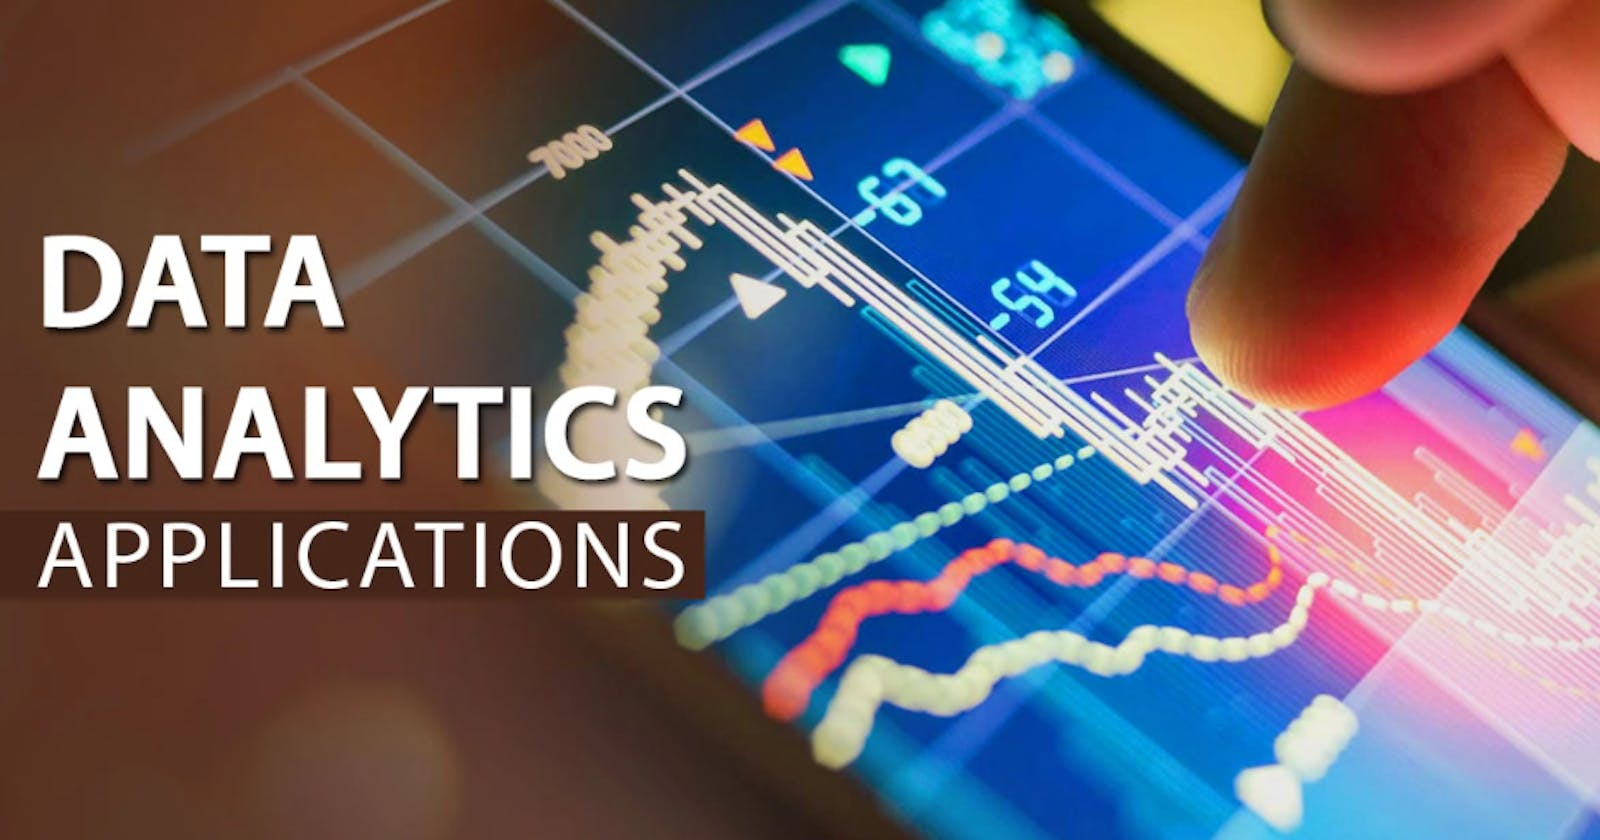 The Power of Data Analytics: Exploring the Applications and Benefits